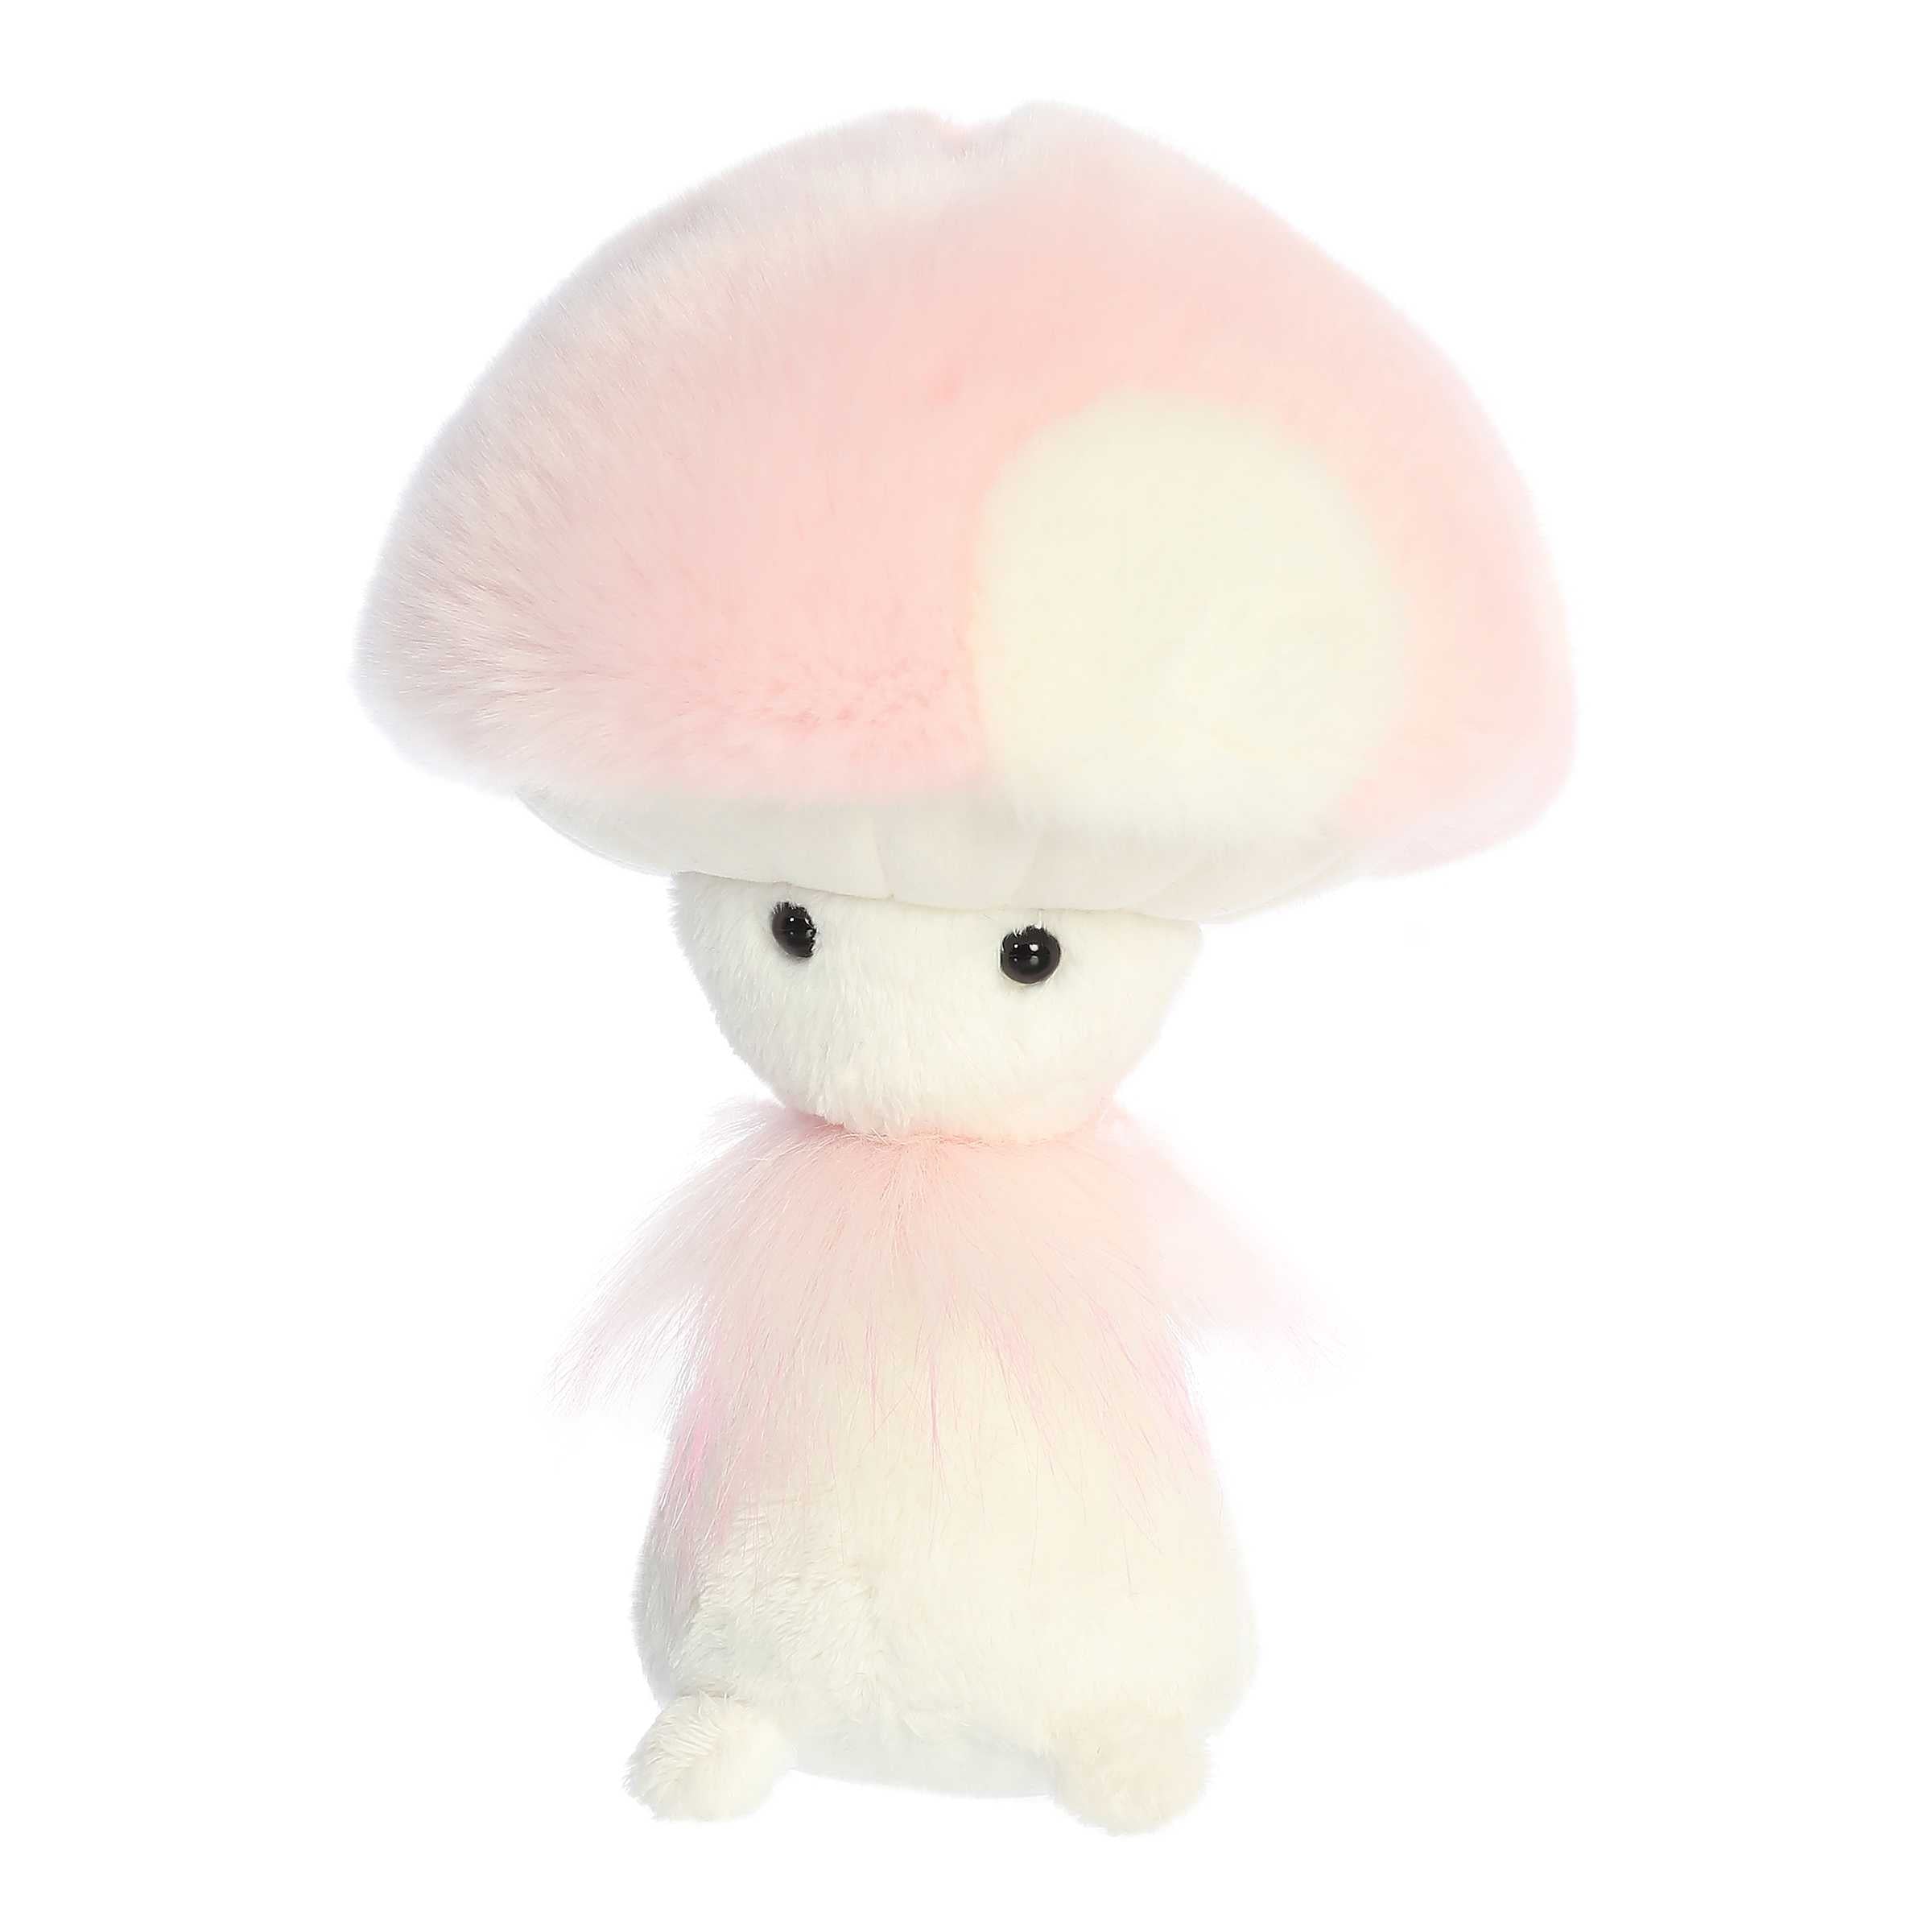 Honey mushroom plush from Fungi Friends, featuring a golden cap and cuddly body, ideal as a magical playmate